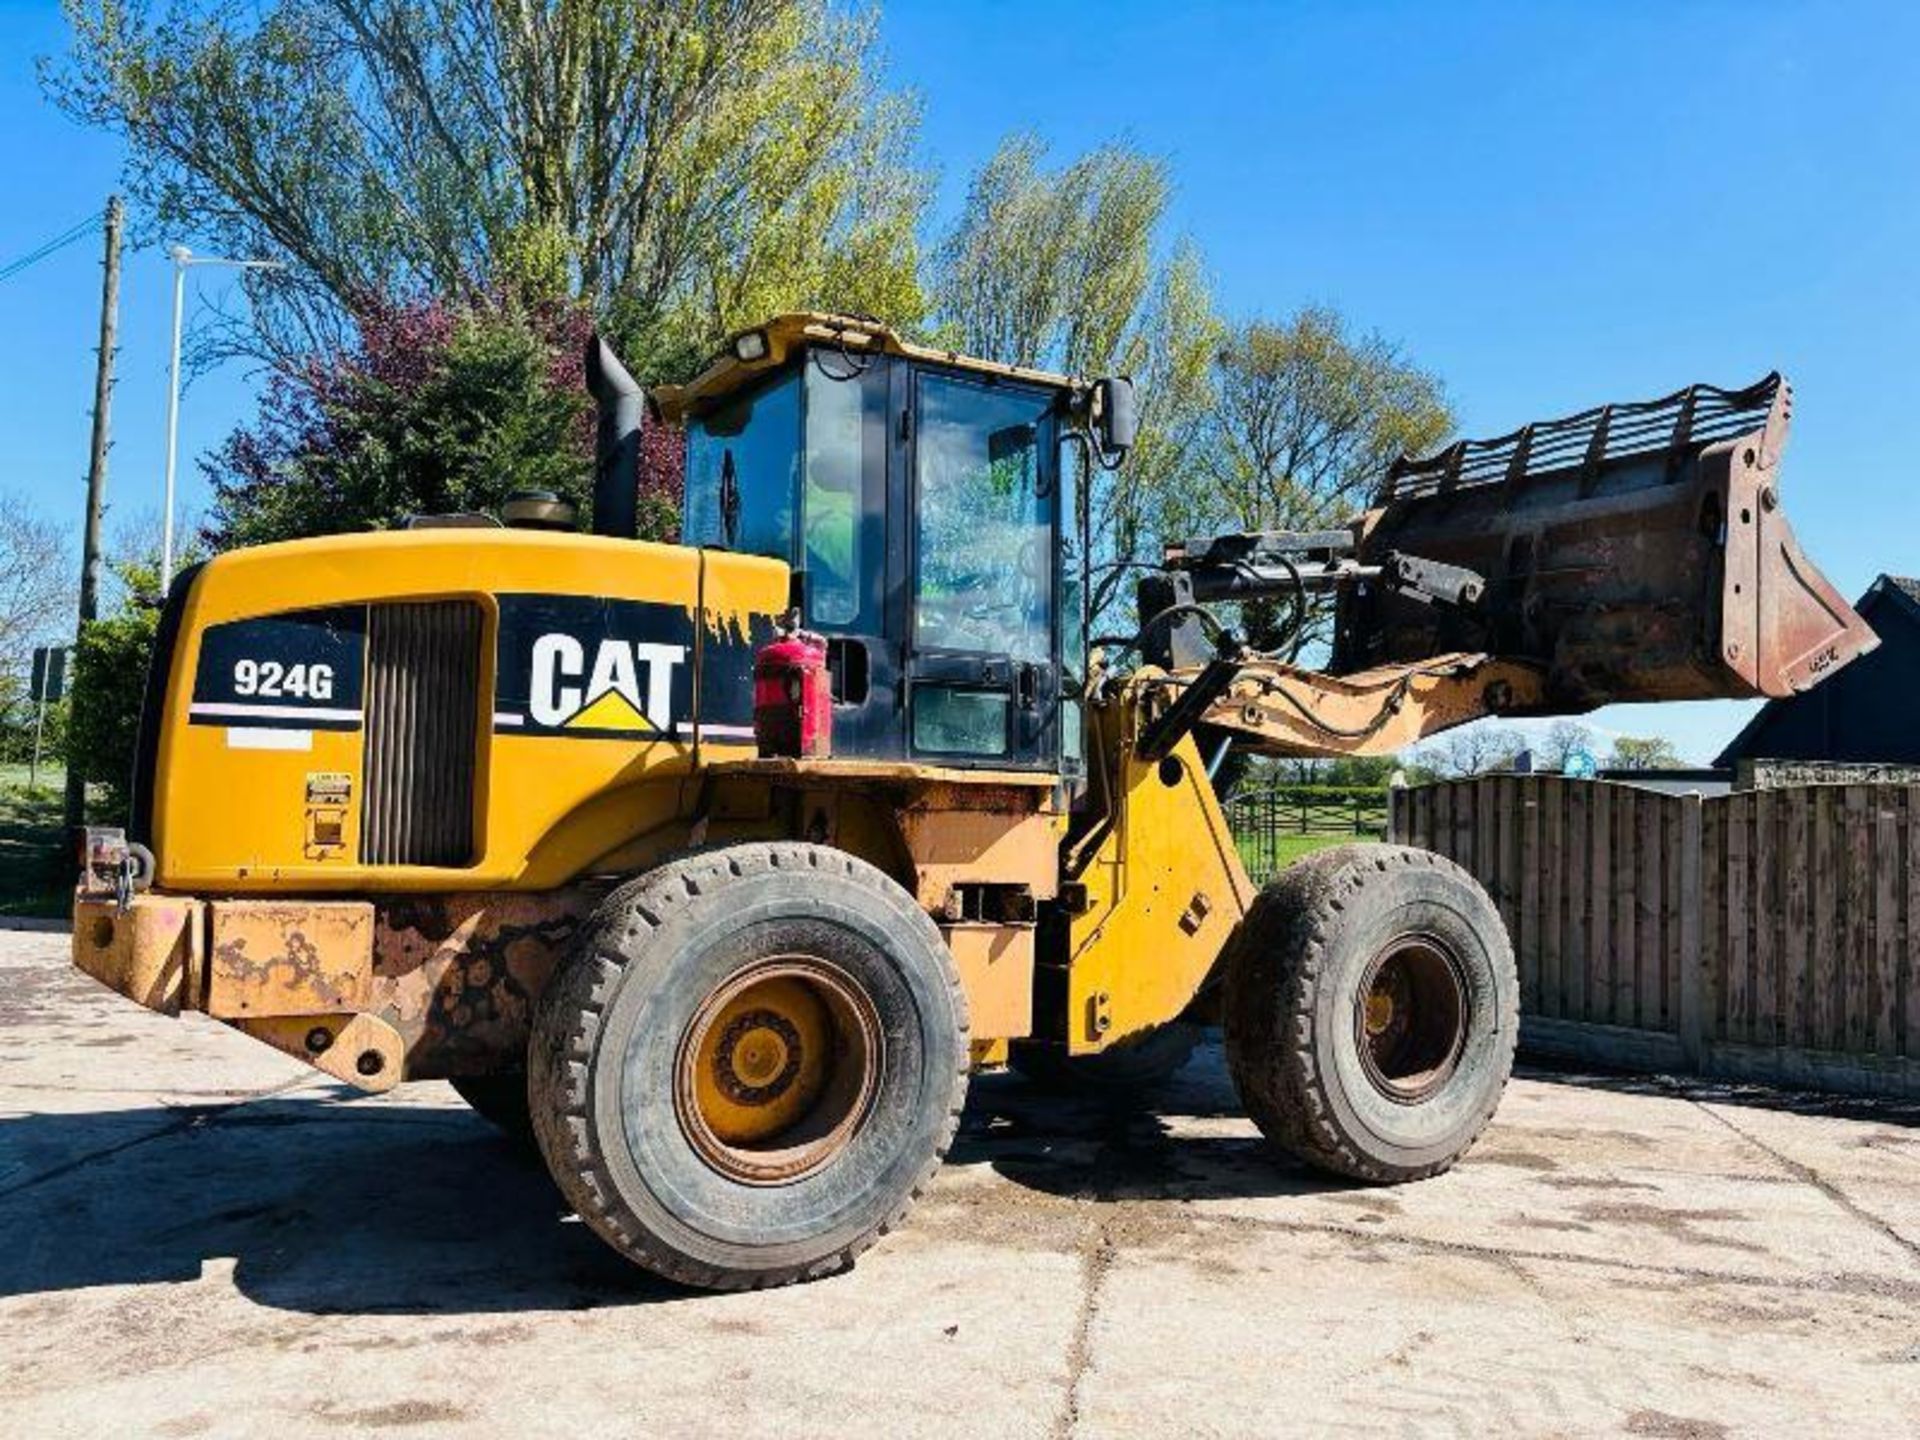 CATERPILLAR 924G 4WD LOADING SHOVEL C/W FOUR IN ONE BUCKET  - Image 12 of 18